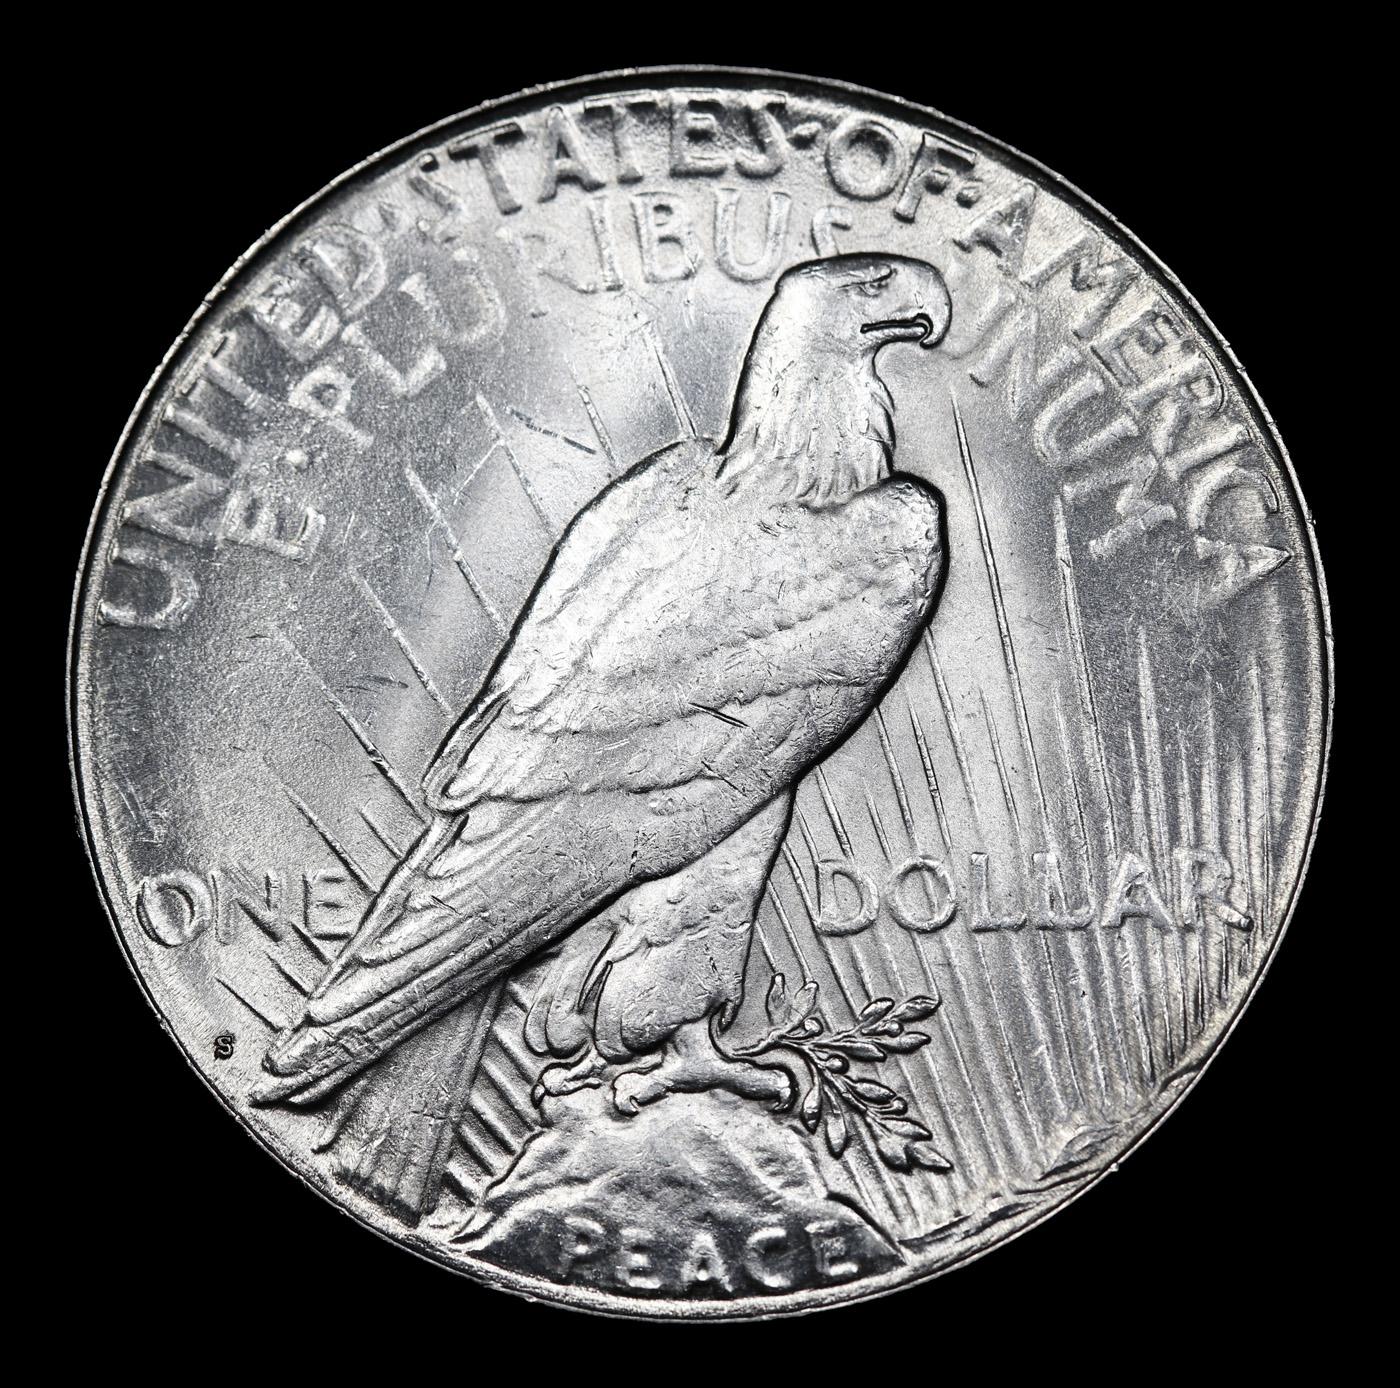 ***Auction Highlight*** 1923-s Peace Dollar $1 Graded ms64+ By SEGS (fc)